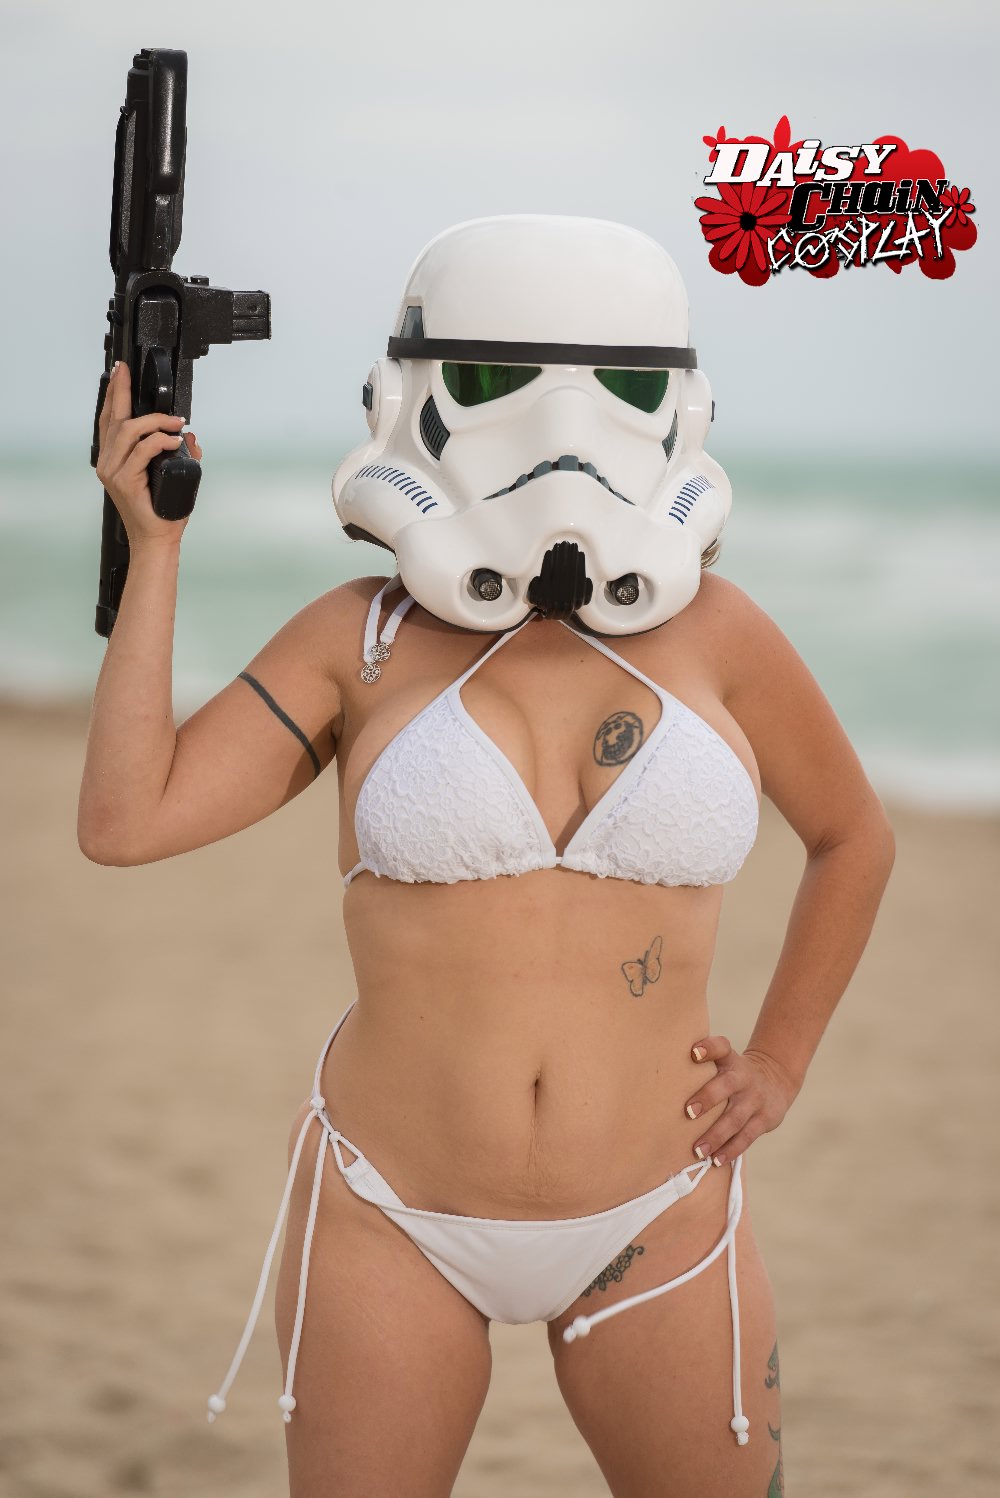 Sexy Storm Trooper - Daisy Chain Coplay #2